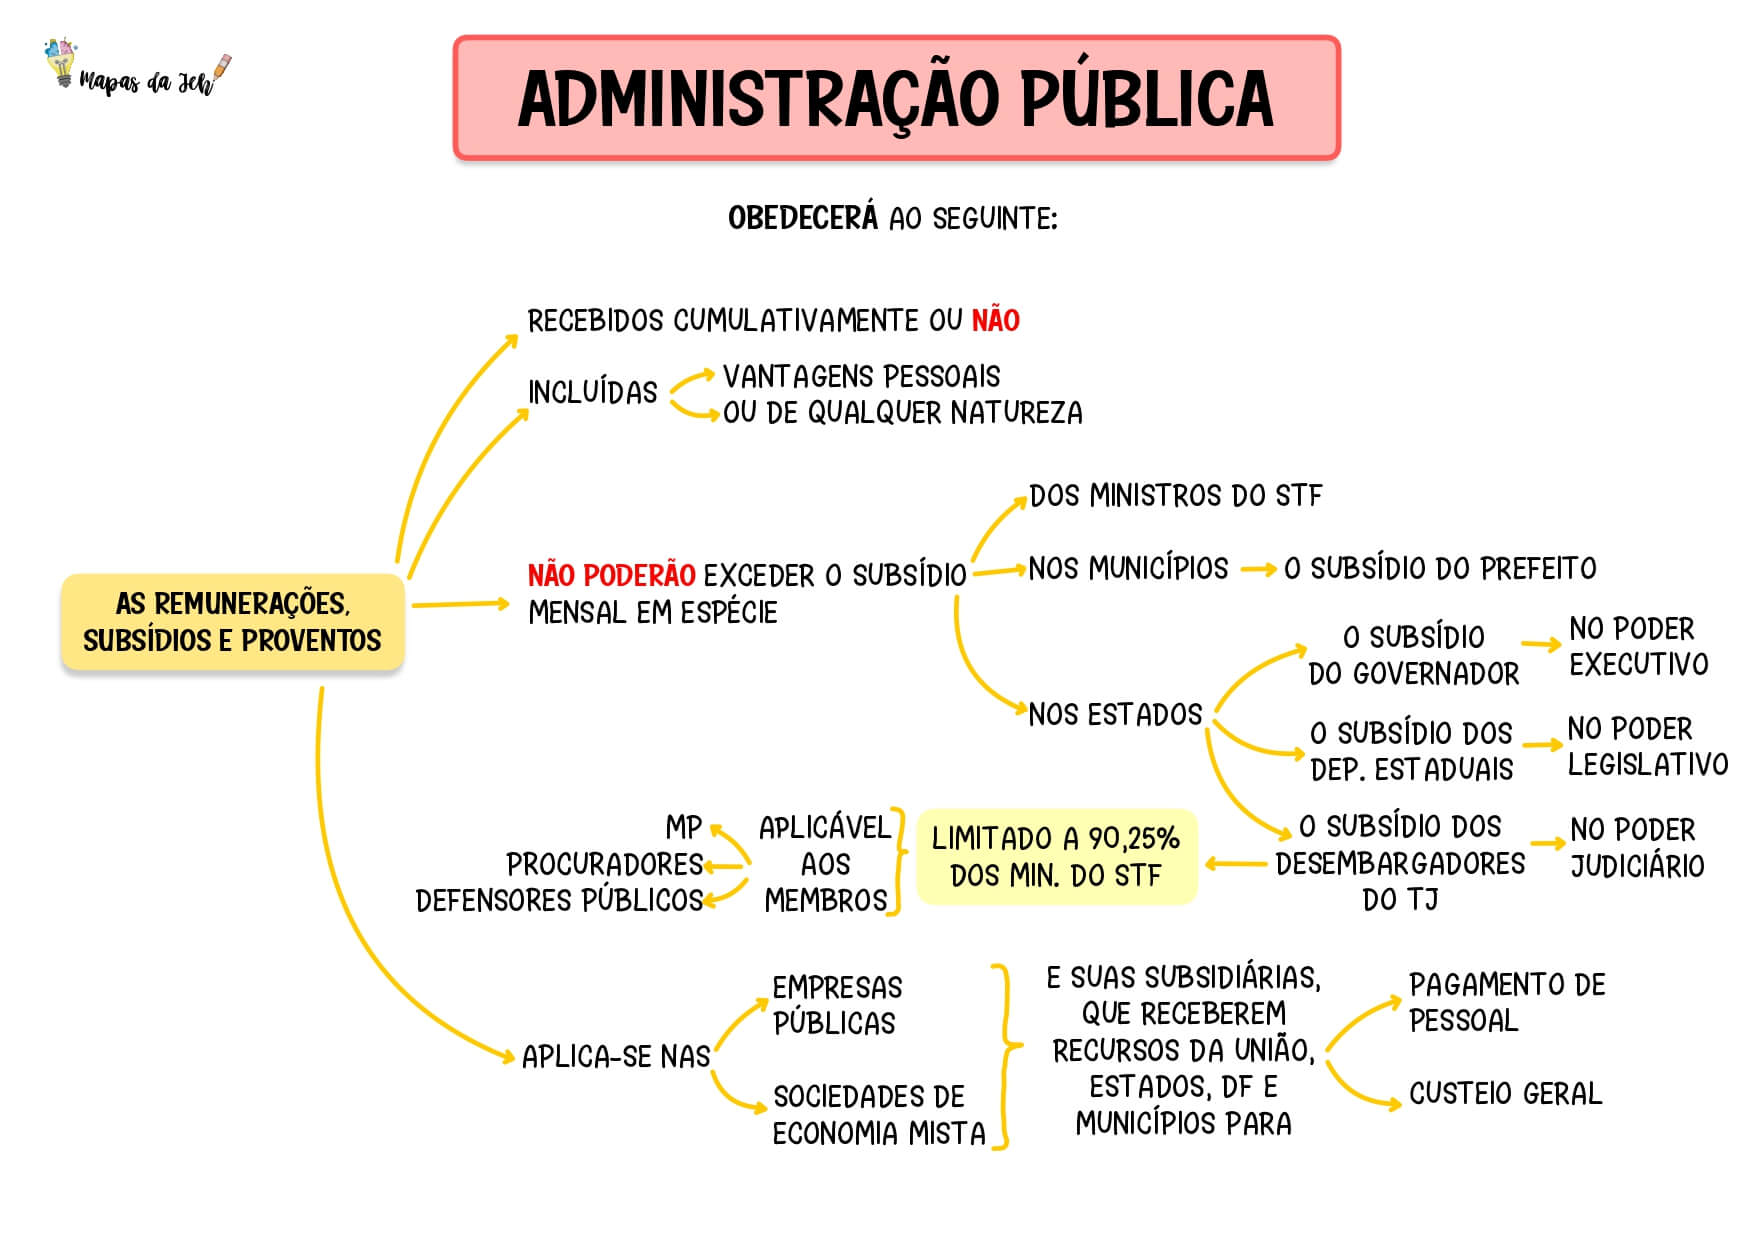 11-ADMINISTRACAO-PUB_pages-to-jpg-0005.jpg